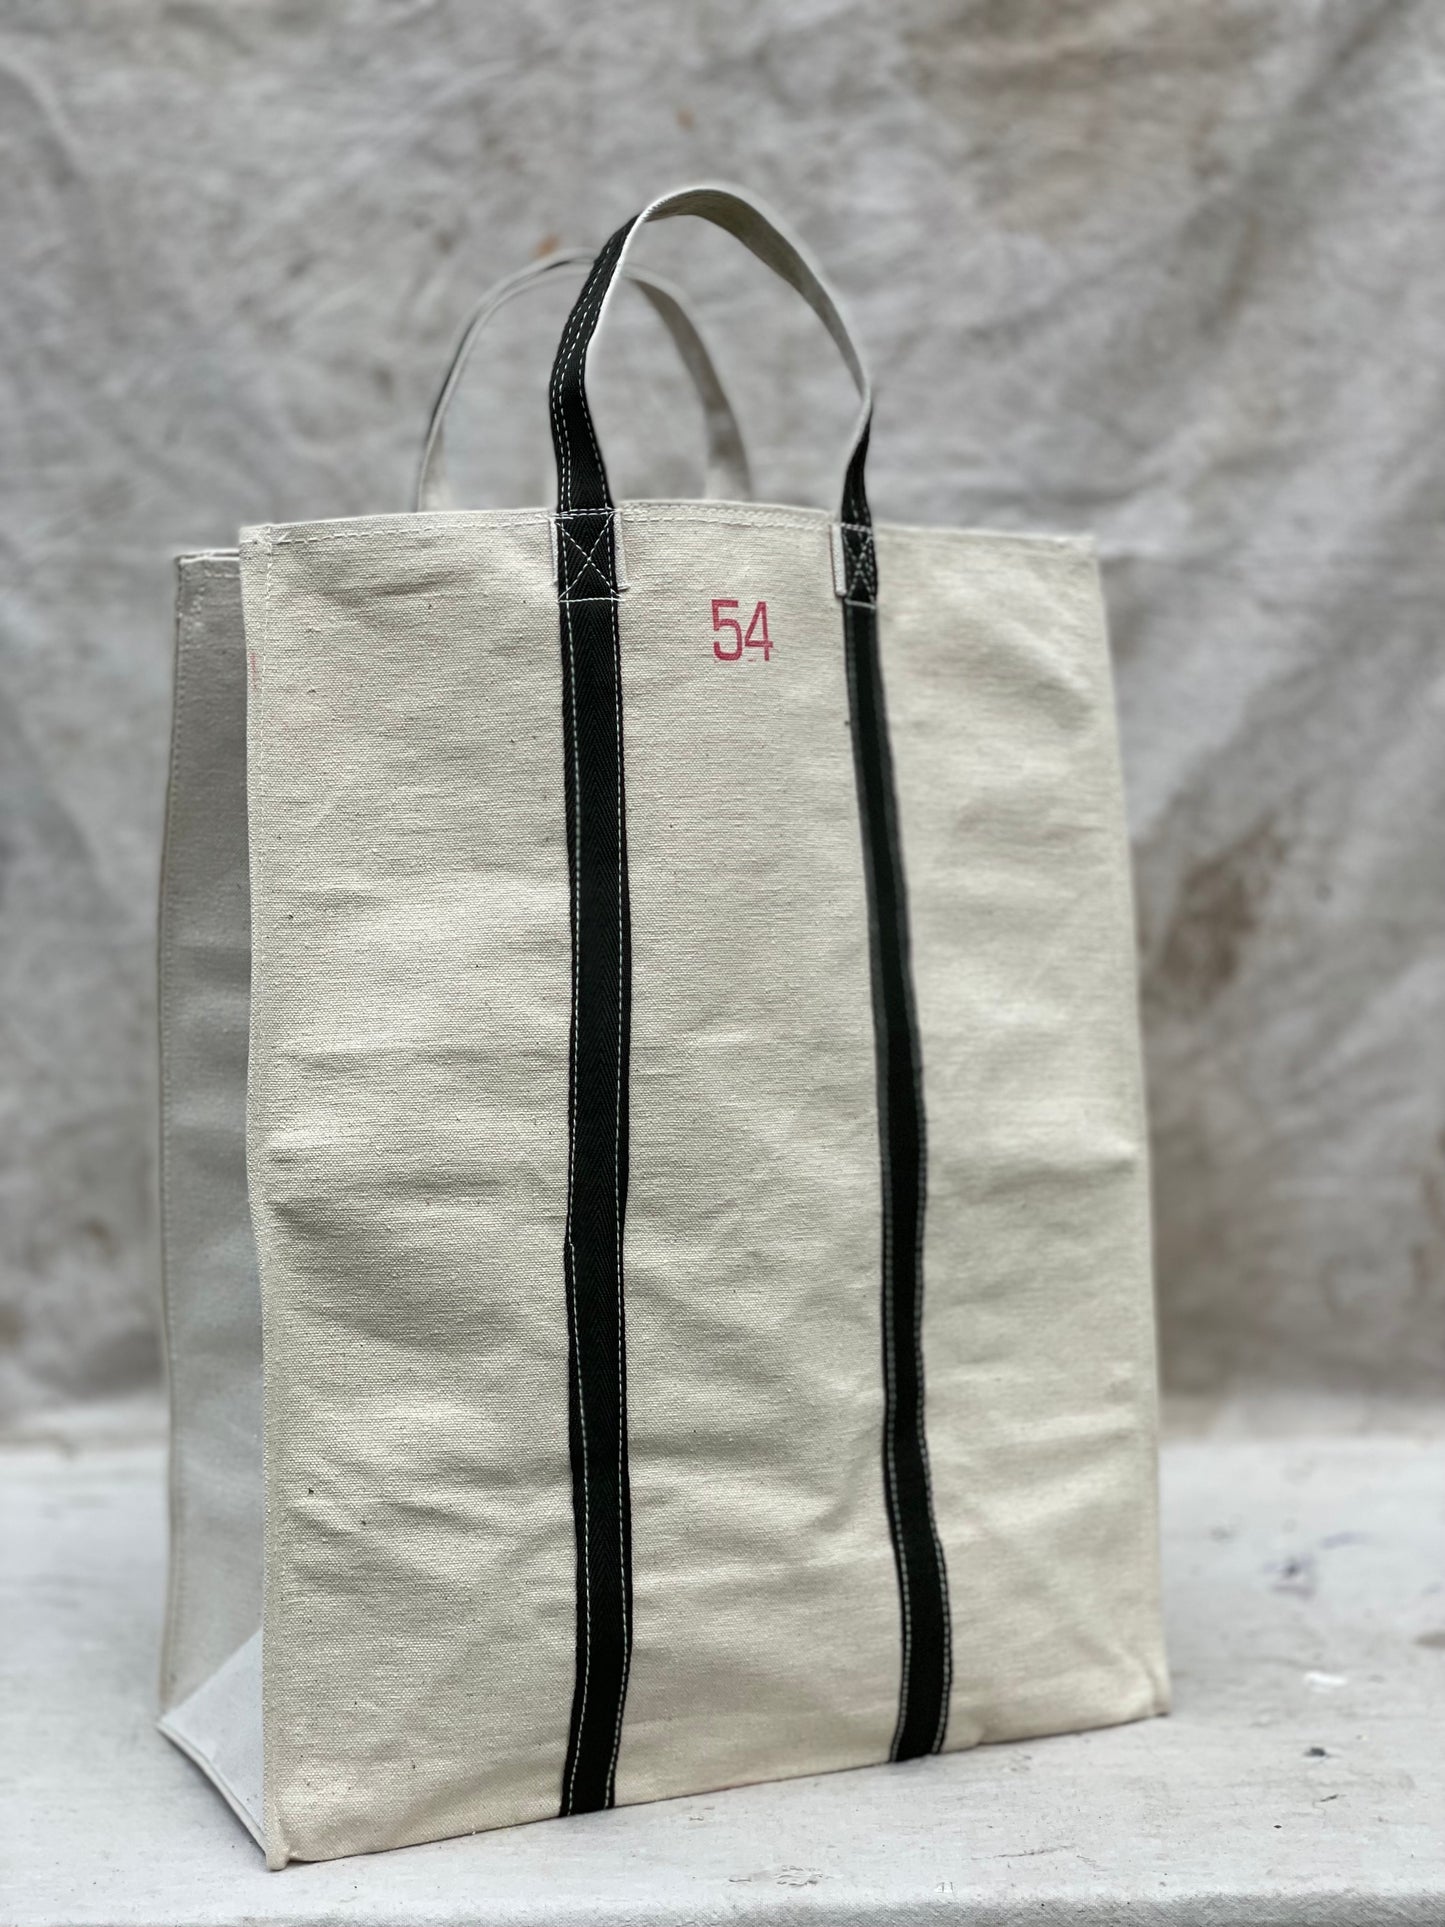 Heavy Duty Natural Canvas Tote Bag Size 54